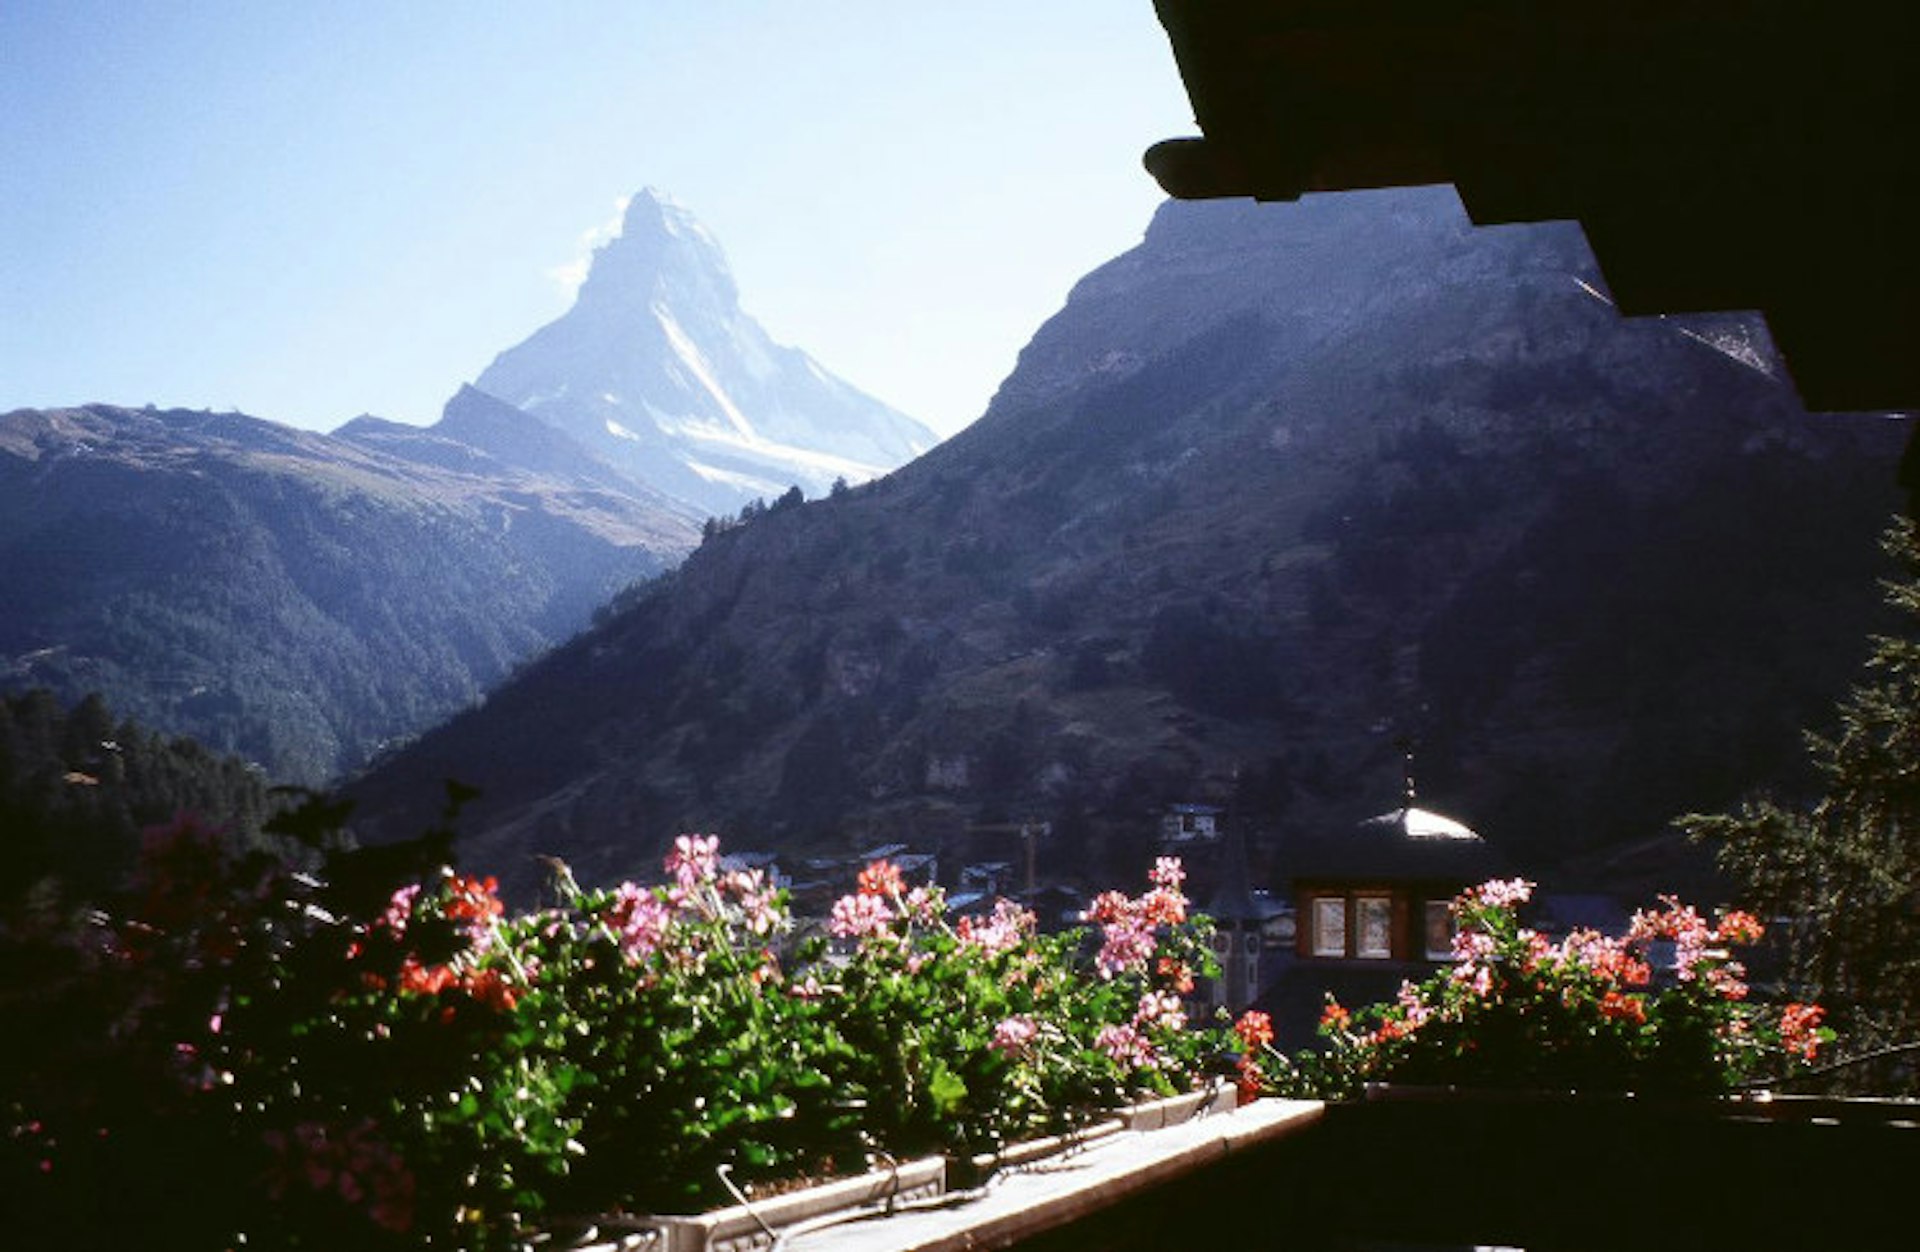 Wake up to the majestic Matterhorn right outside your hotel window. Image by Peter Stevens/CC BY 2.0